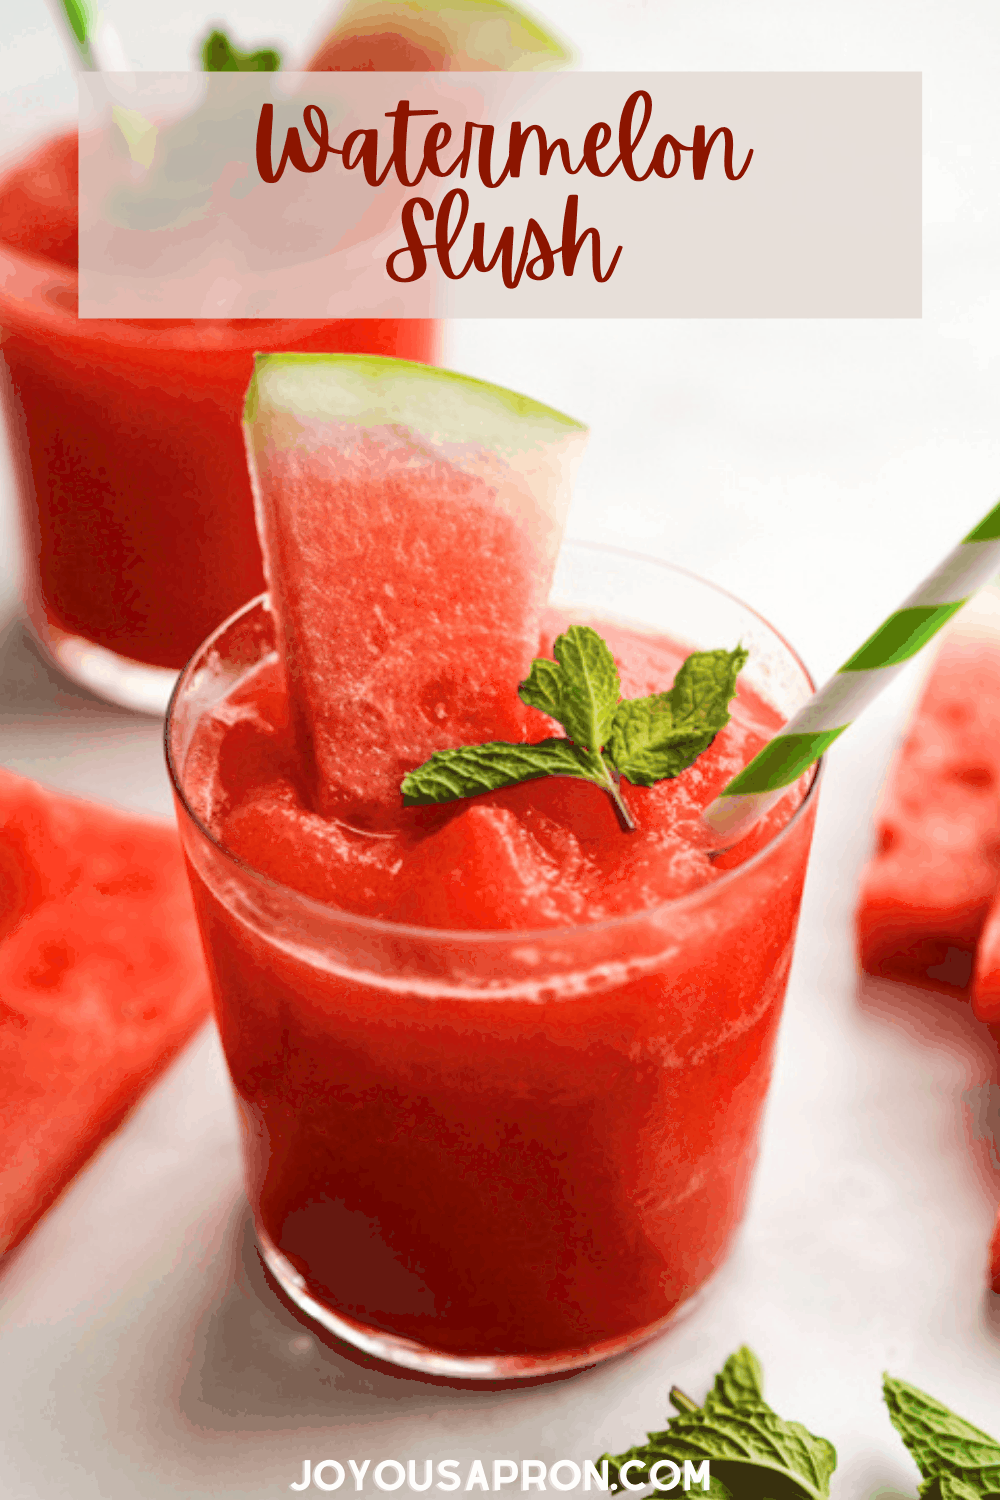 Watermelon Slush - this easy homemade frozen watermelon beverage made with fresh watermelon is perfect for the summer! A refreshing and delicious drink. via @joyousapron